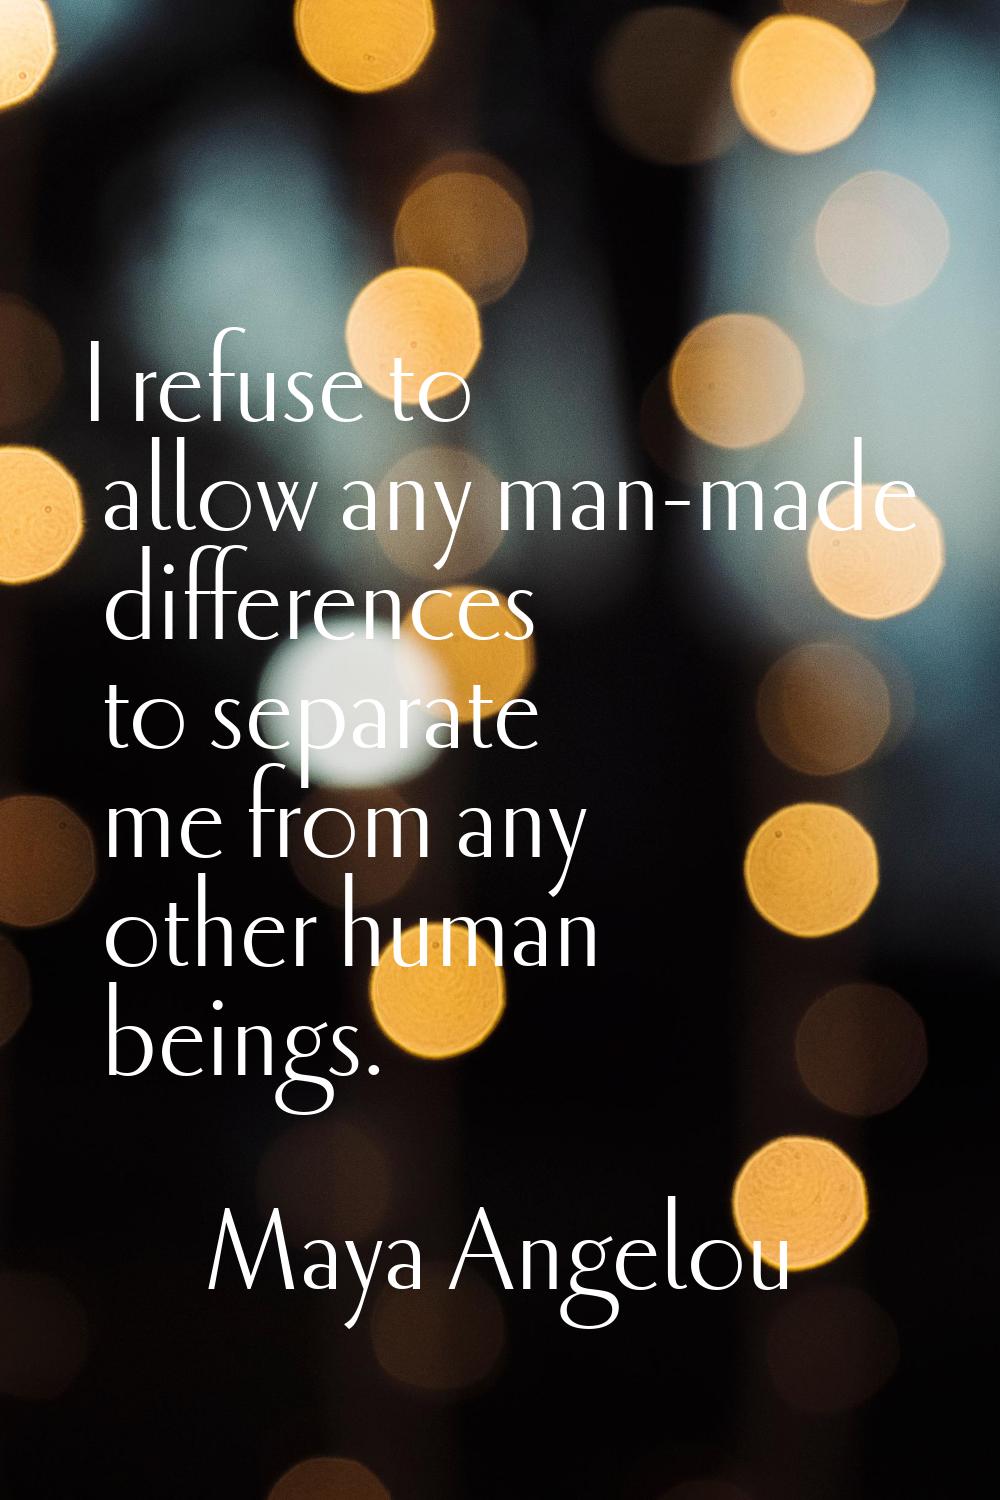 I refuse to allow any man-made differences to separate me from any other human beings.